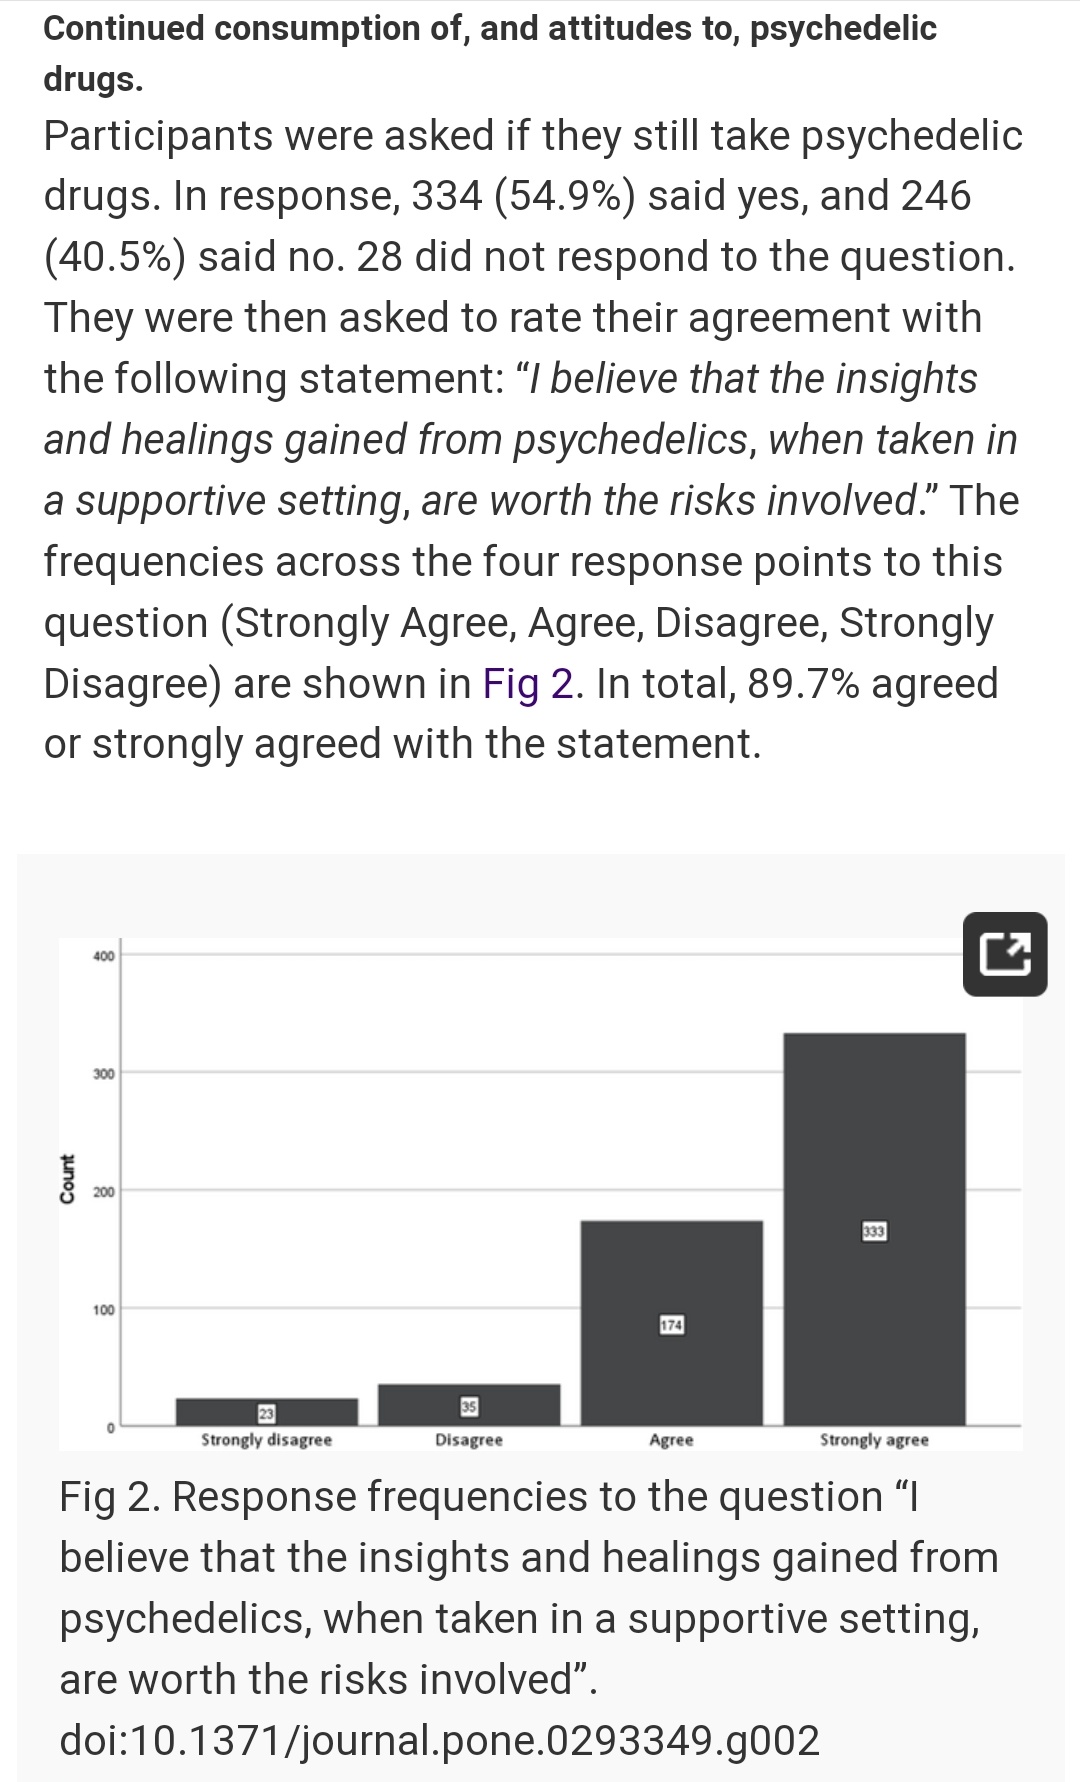 Graph outlining response frequency